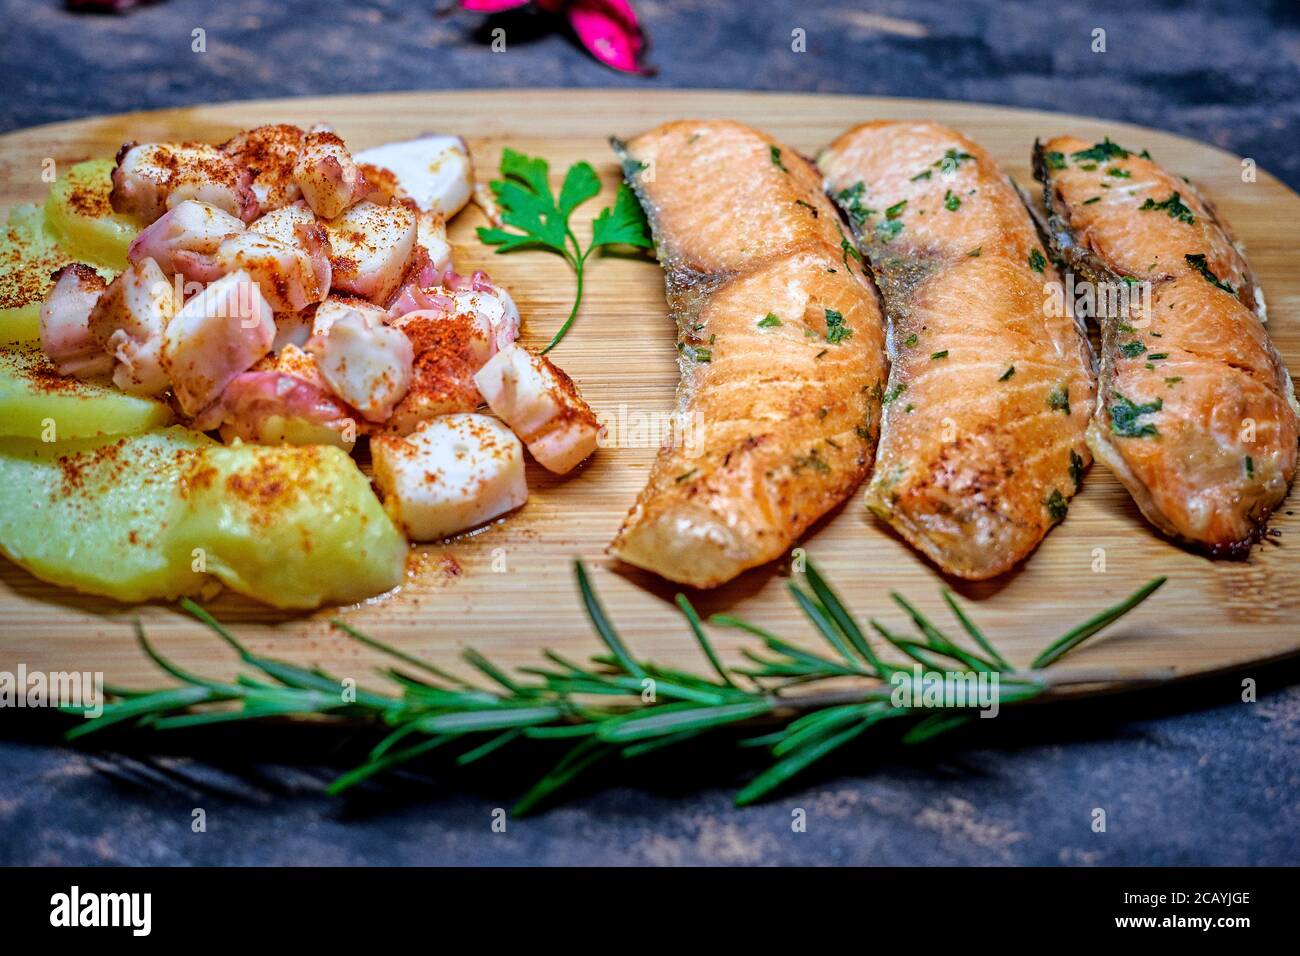 A wood dish with a salmon to dinner today Stock Photo